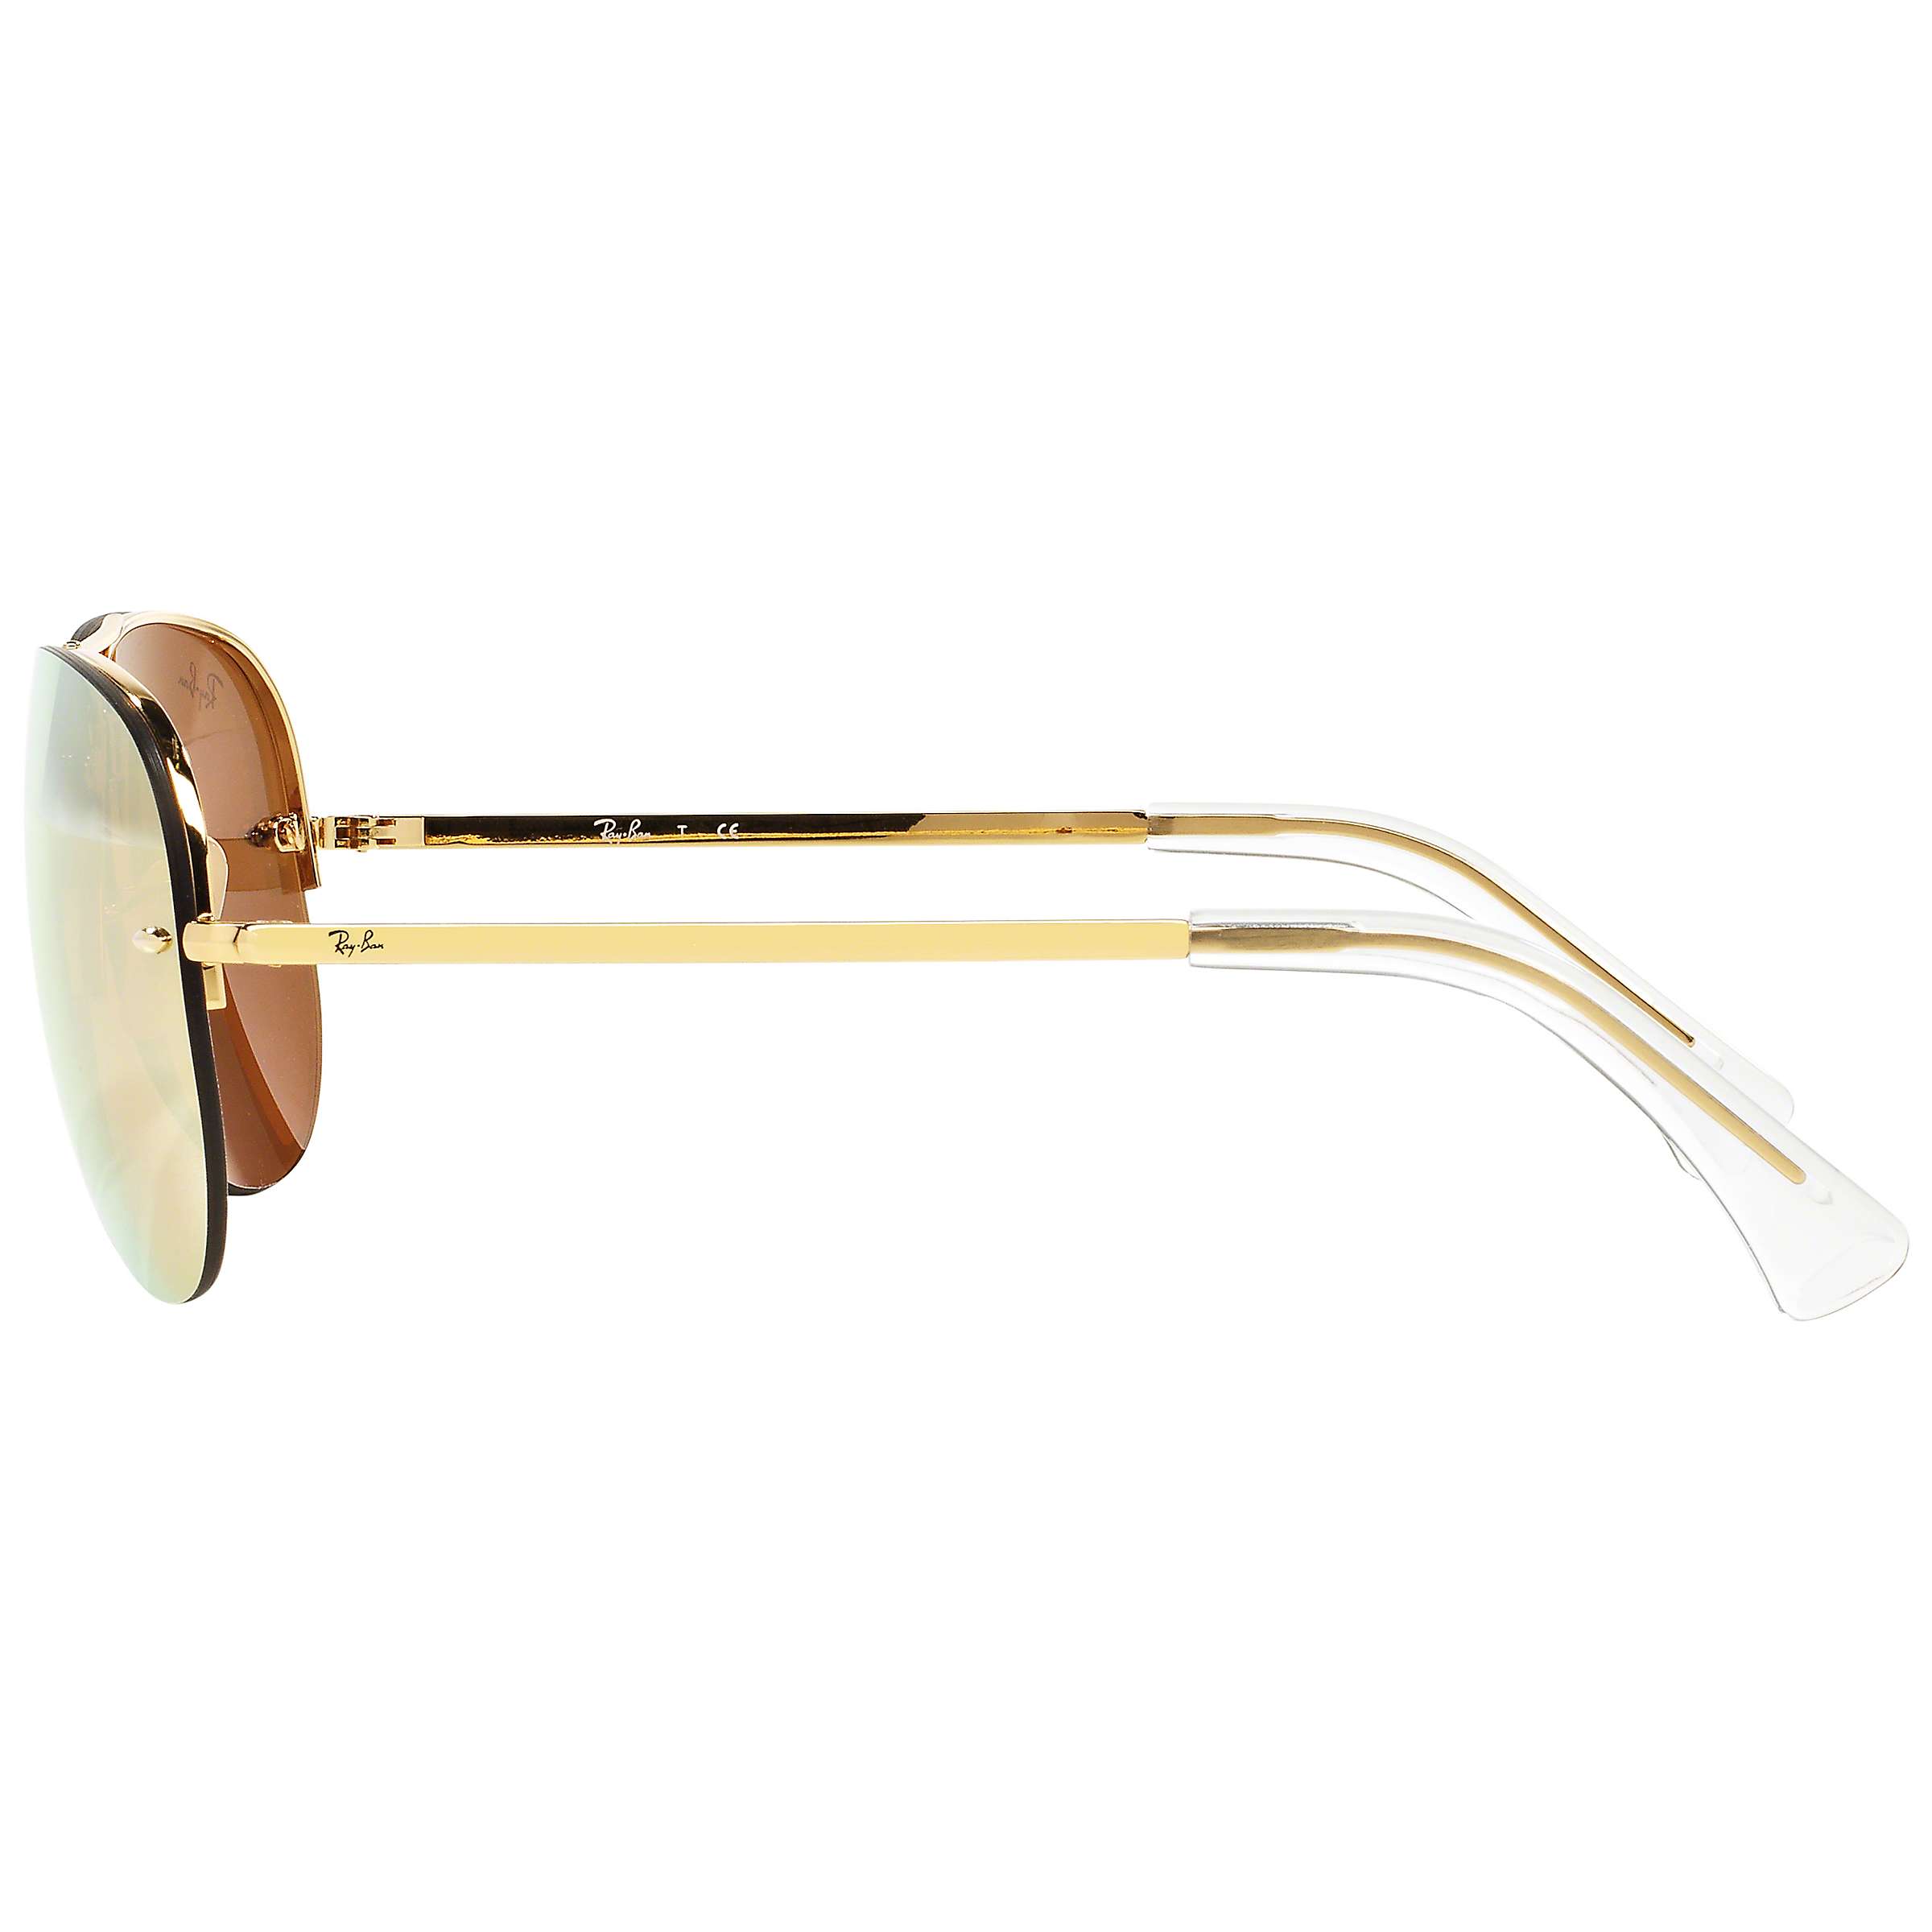 Buy Ray-Ban RB3449 Aviator Sunglasses Online at johnlewis.com